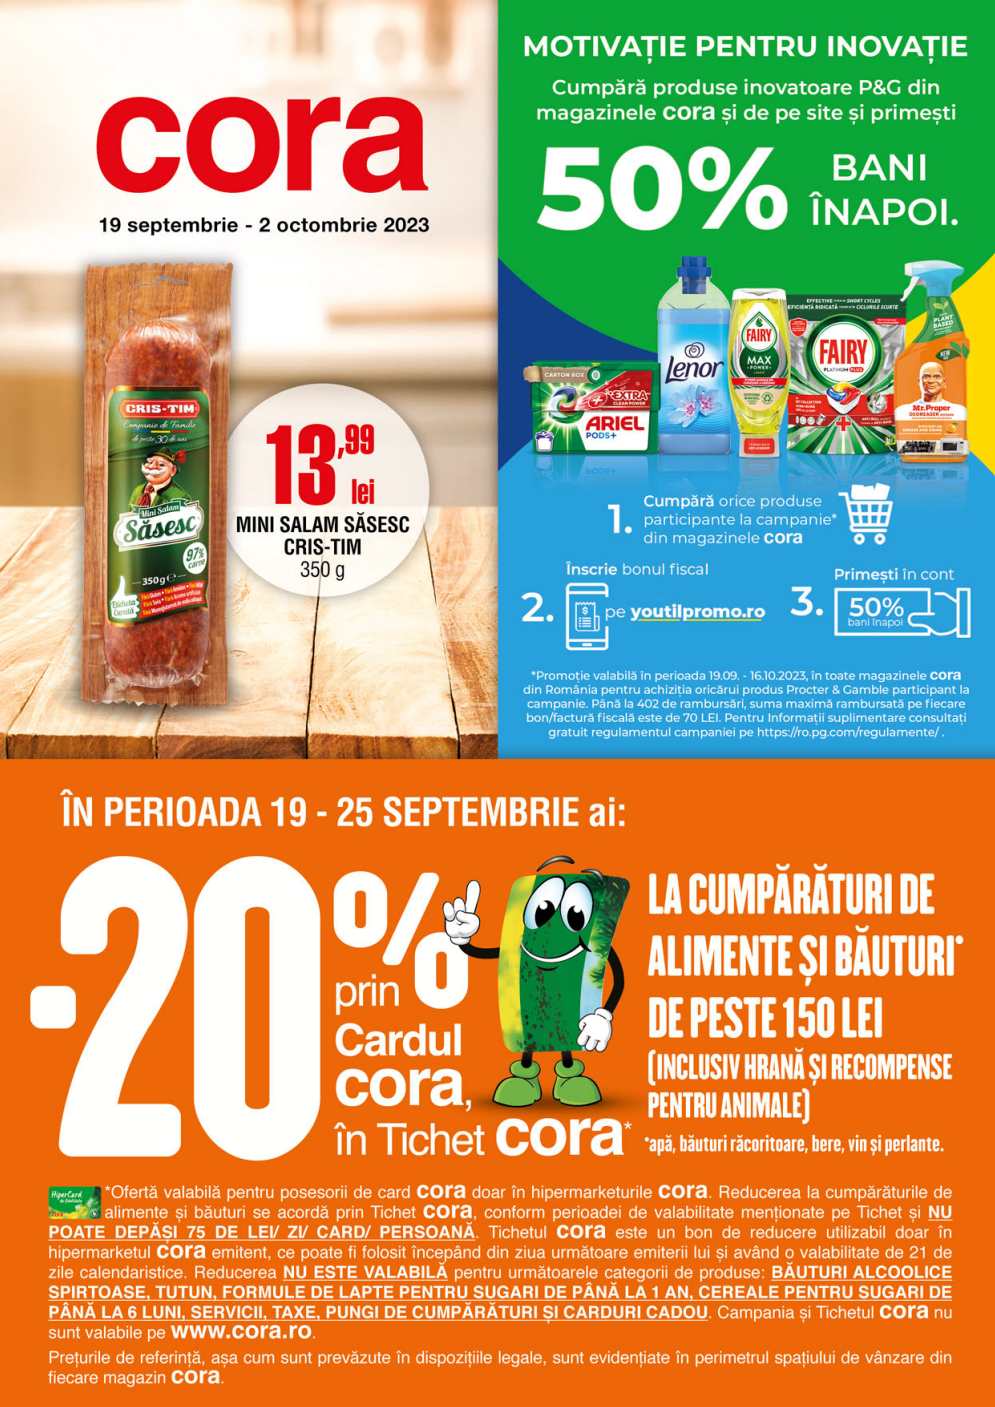 Catalog CORA 19 Septembrie 2023 - 02 Octombrie 2023 - Alimentare